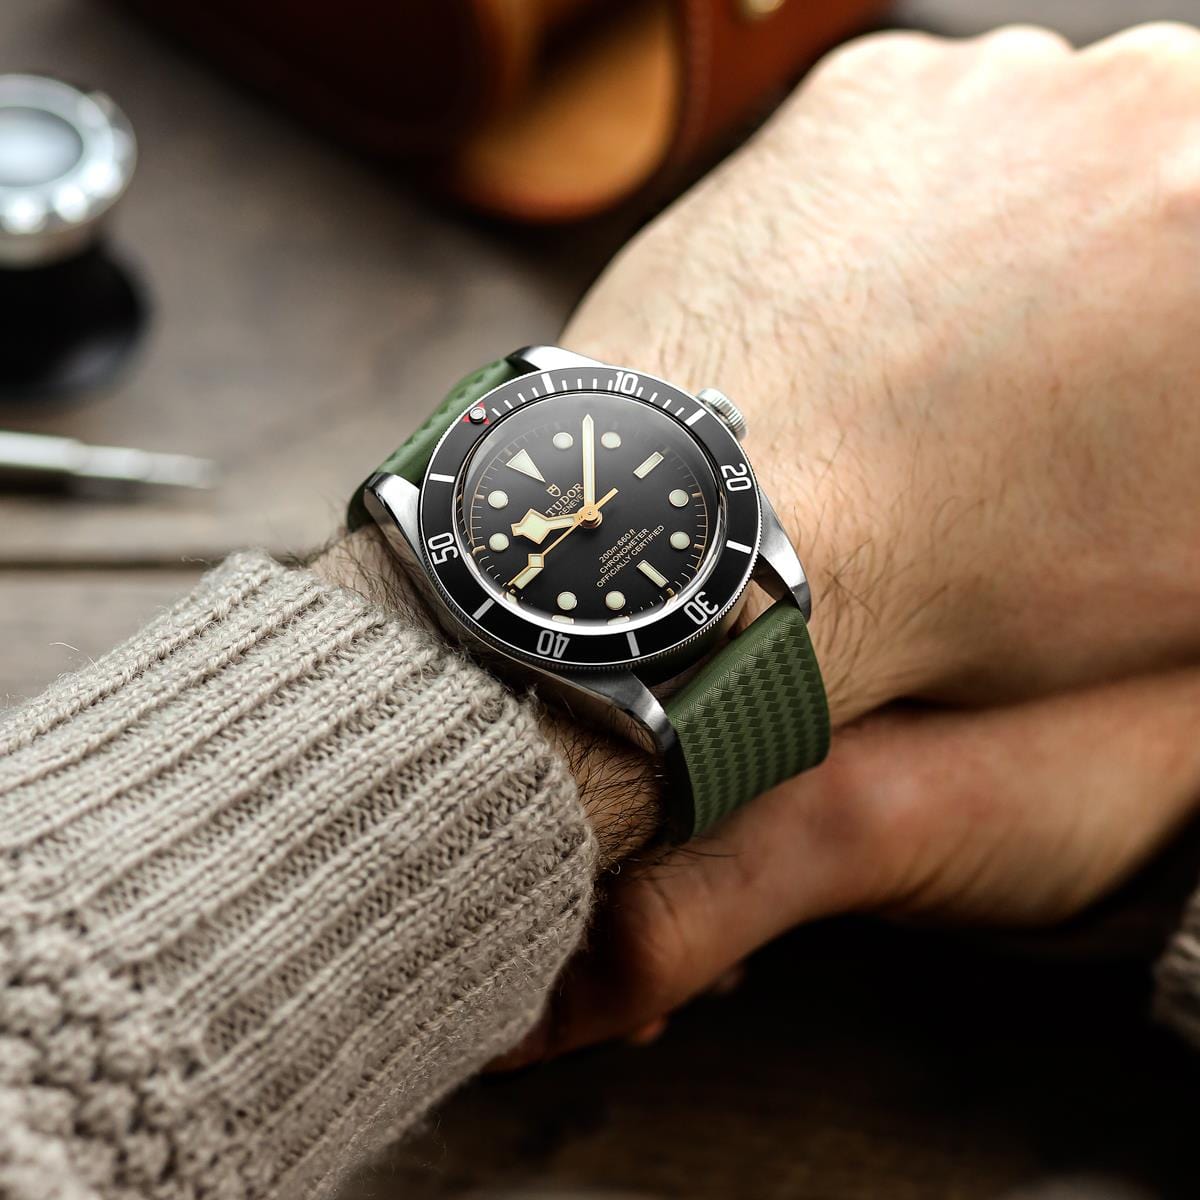 WatchGecko 400 (MKII) Italian Rubber Divers Watch Strap - Military Green - Brushed Buckle